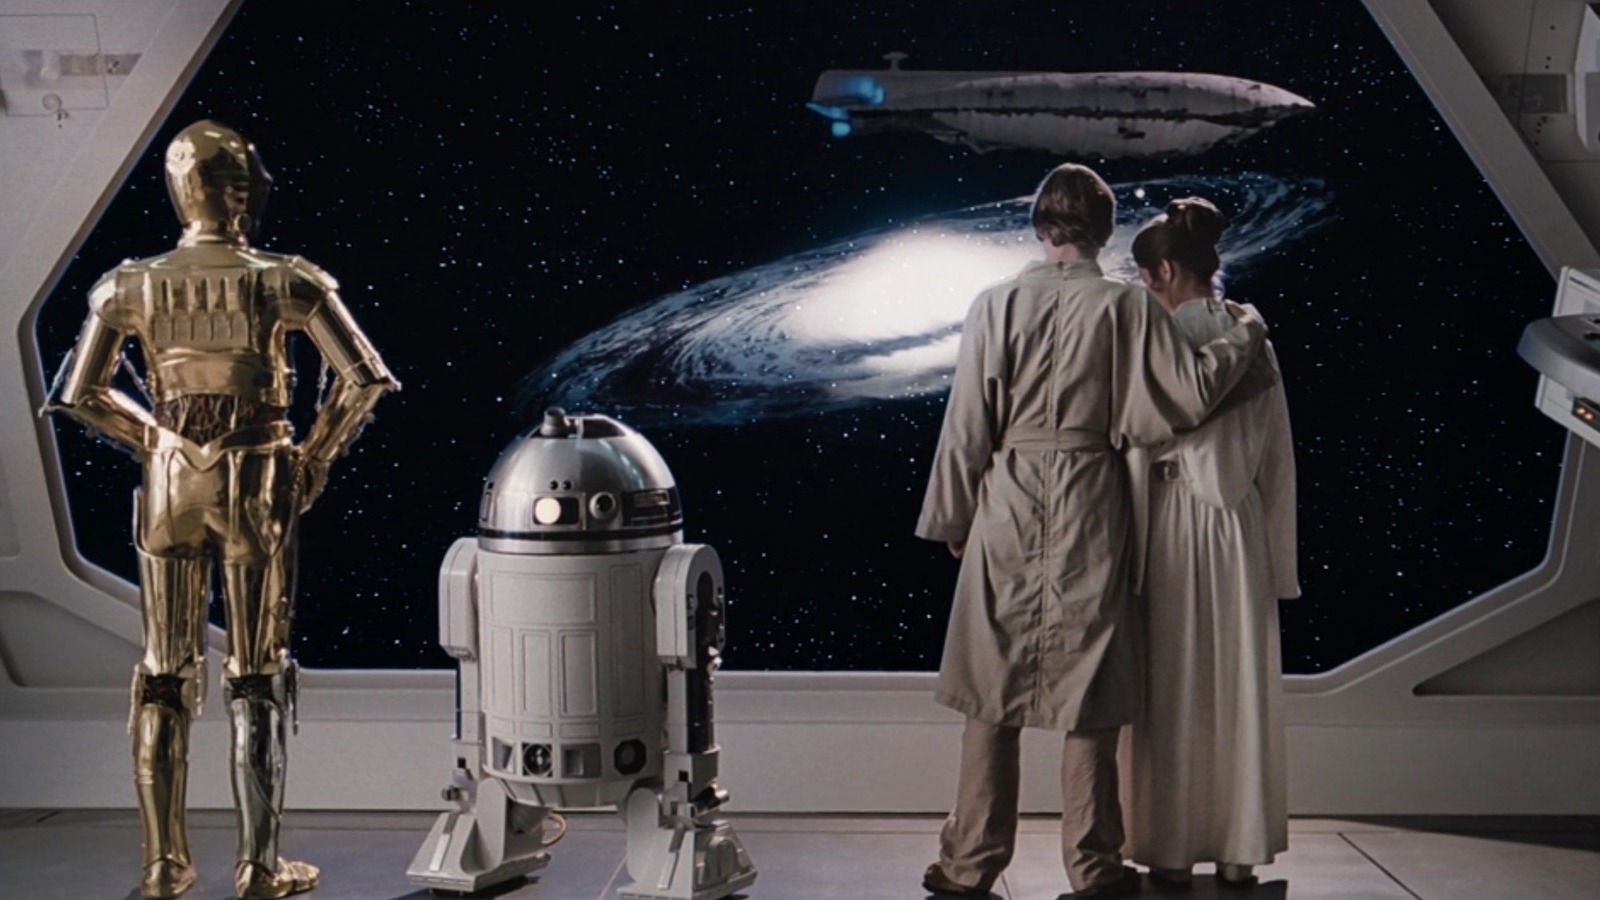 A still from The Empire Strikes Back